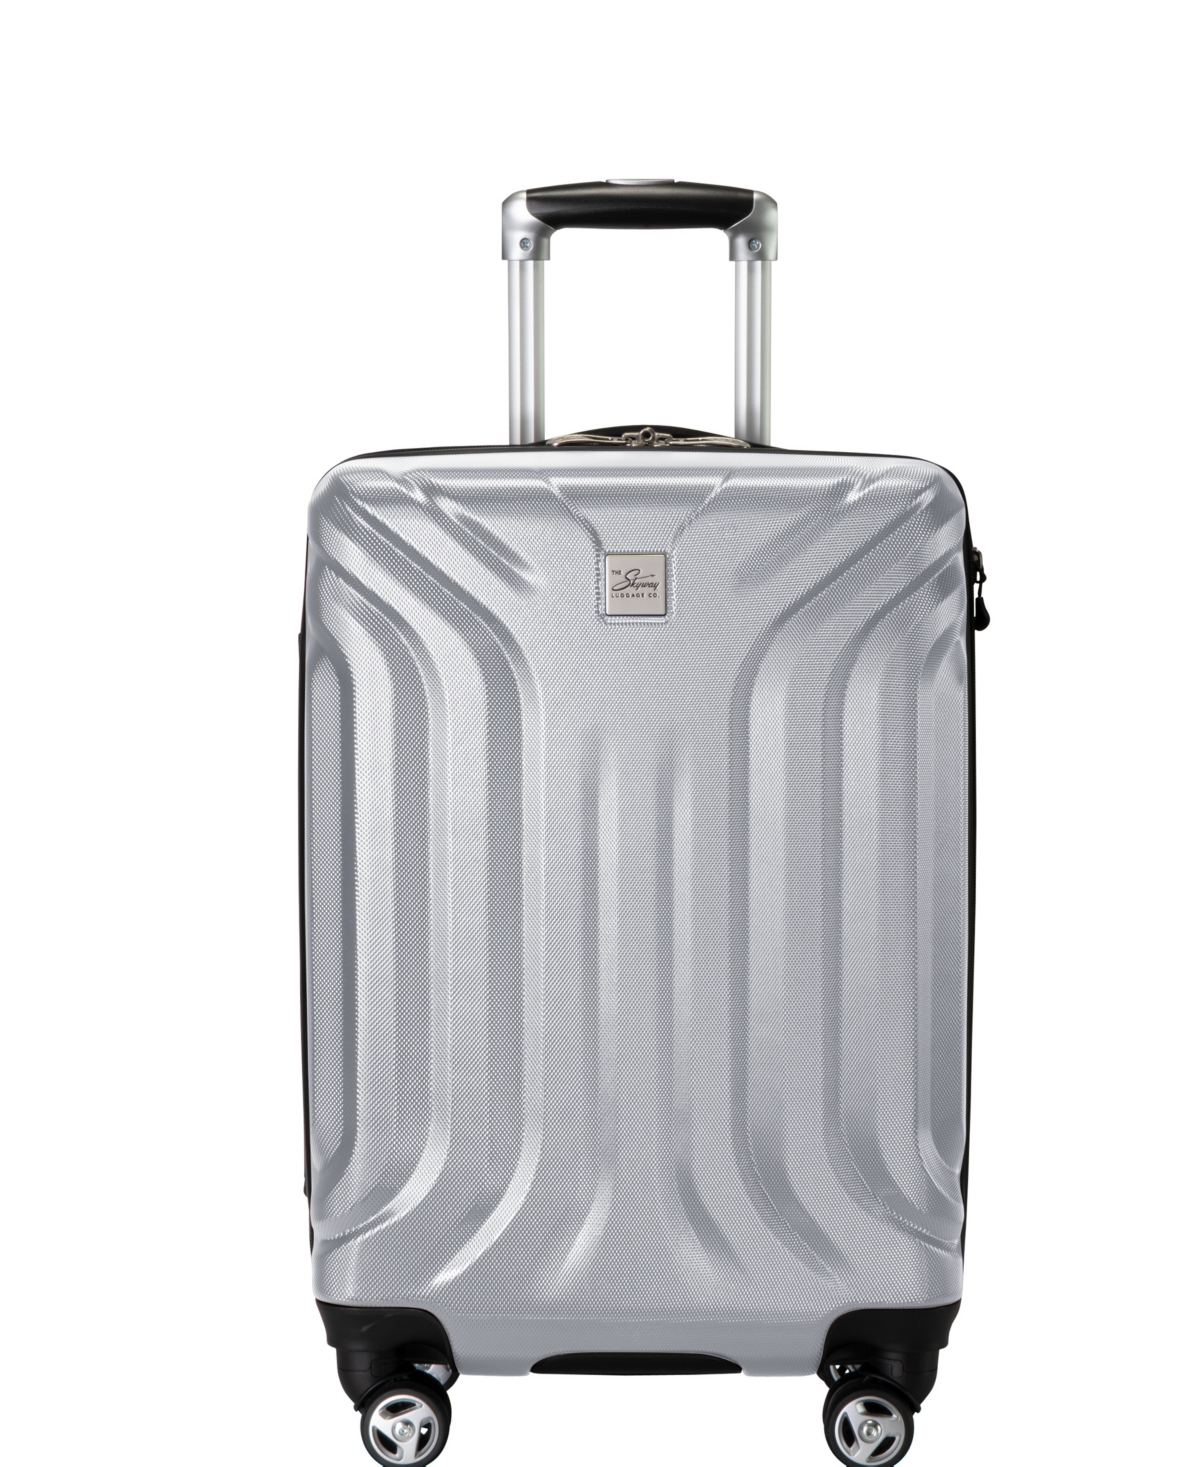 Skyway Nimbus 4.0 20" Hardside Carry-on Suitcase In Shiny Silver